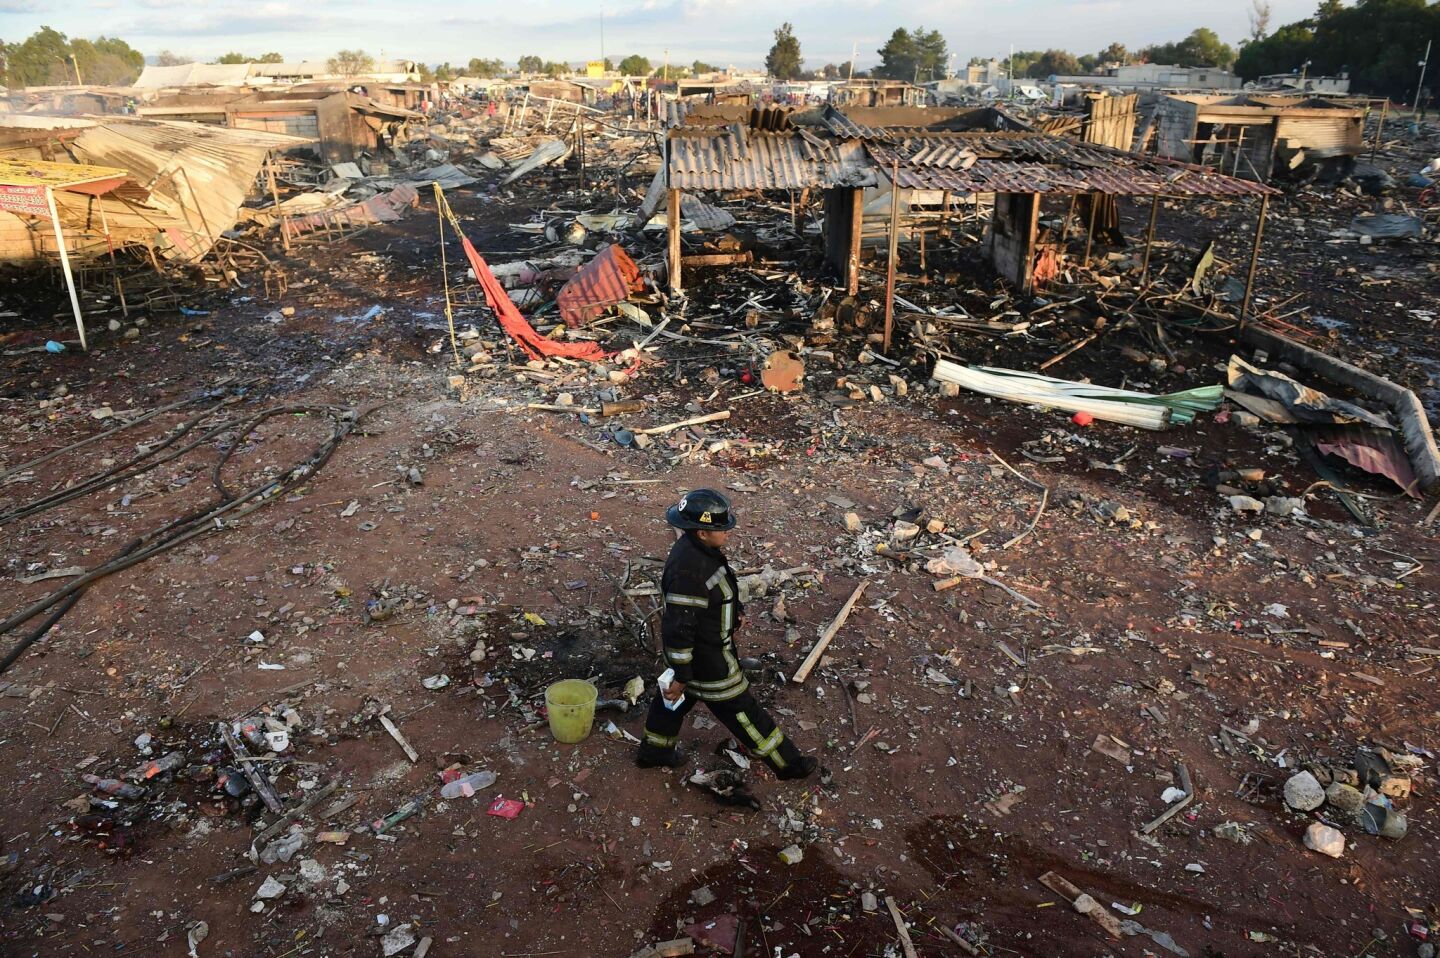 Firefighters work amid the debris left by a huge blast at a fireworks market in Tultepec, Mexico.